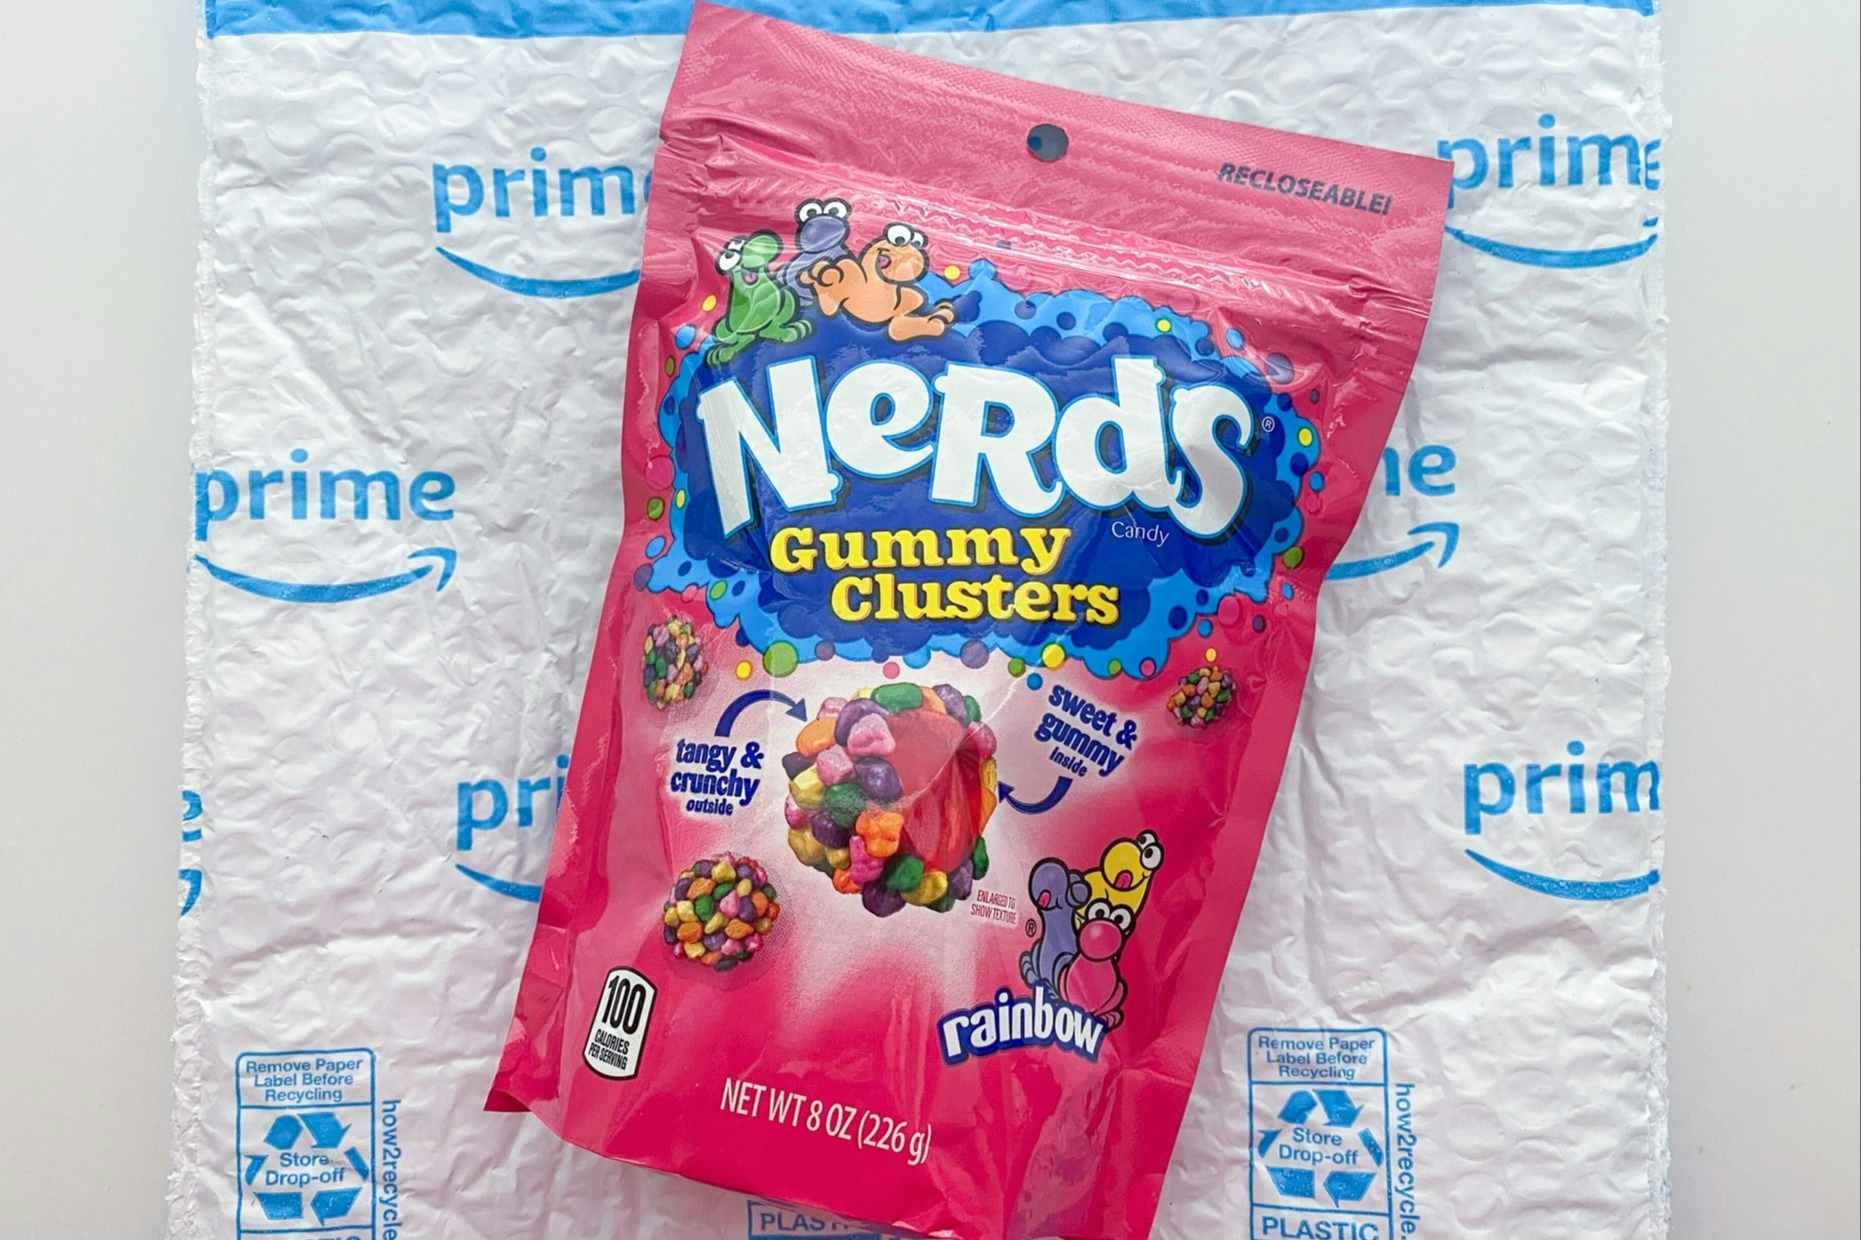 Nerds Gummy Clusters Candy, as Low as $1.40 on Amazon